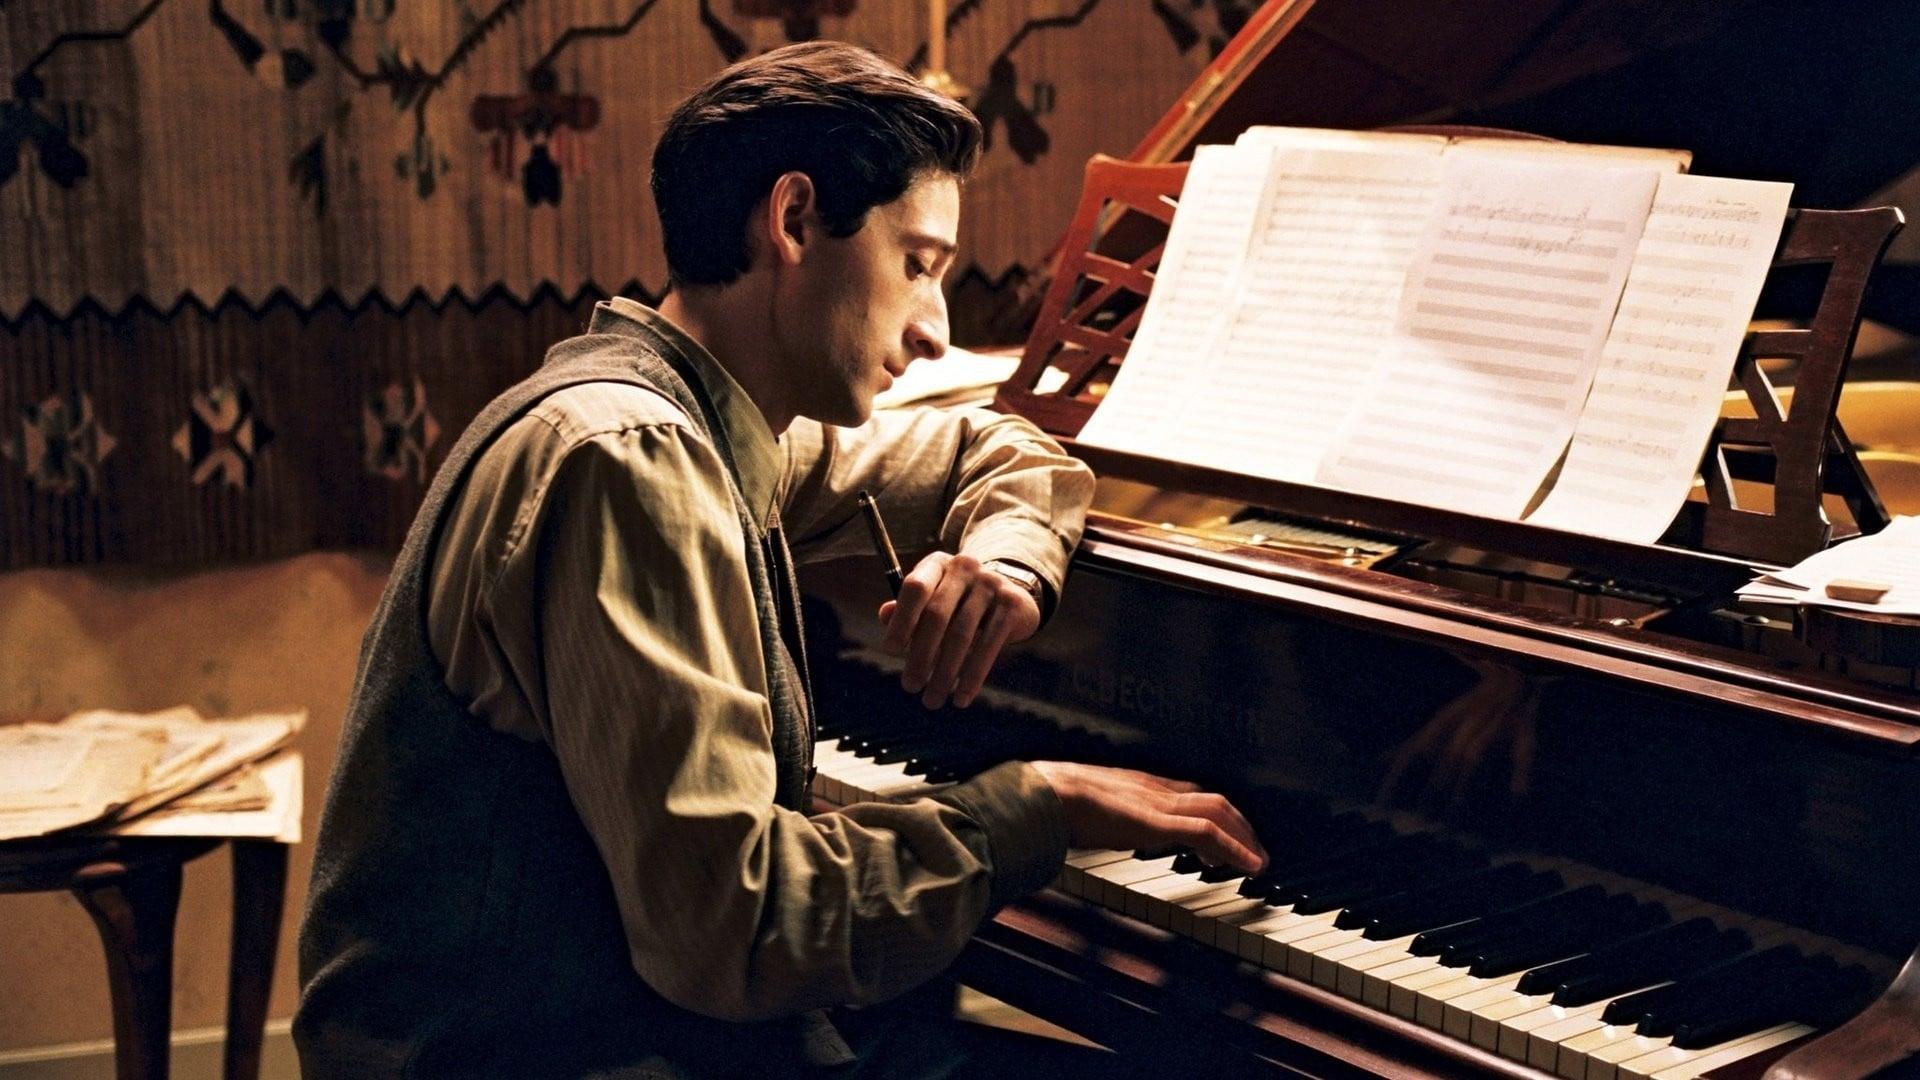 Backdrop Image for The Pianist